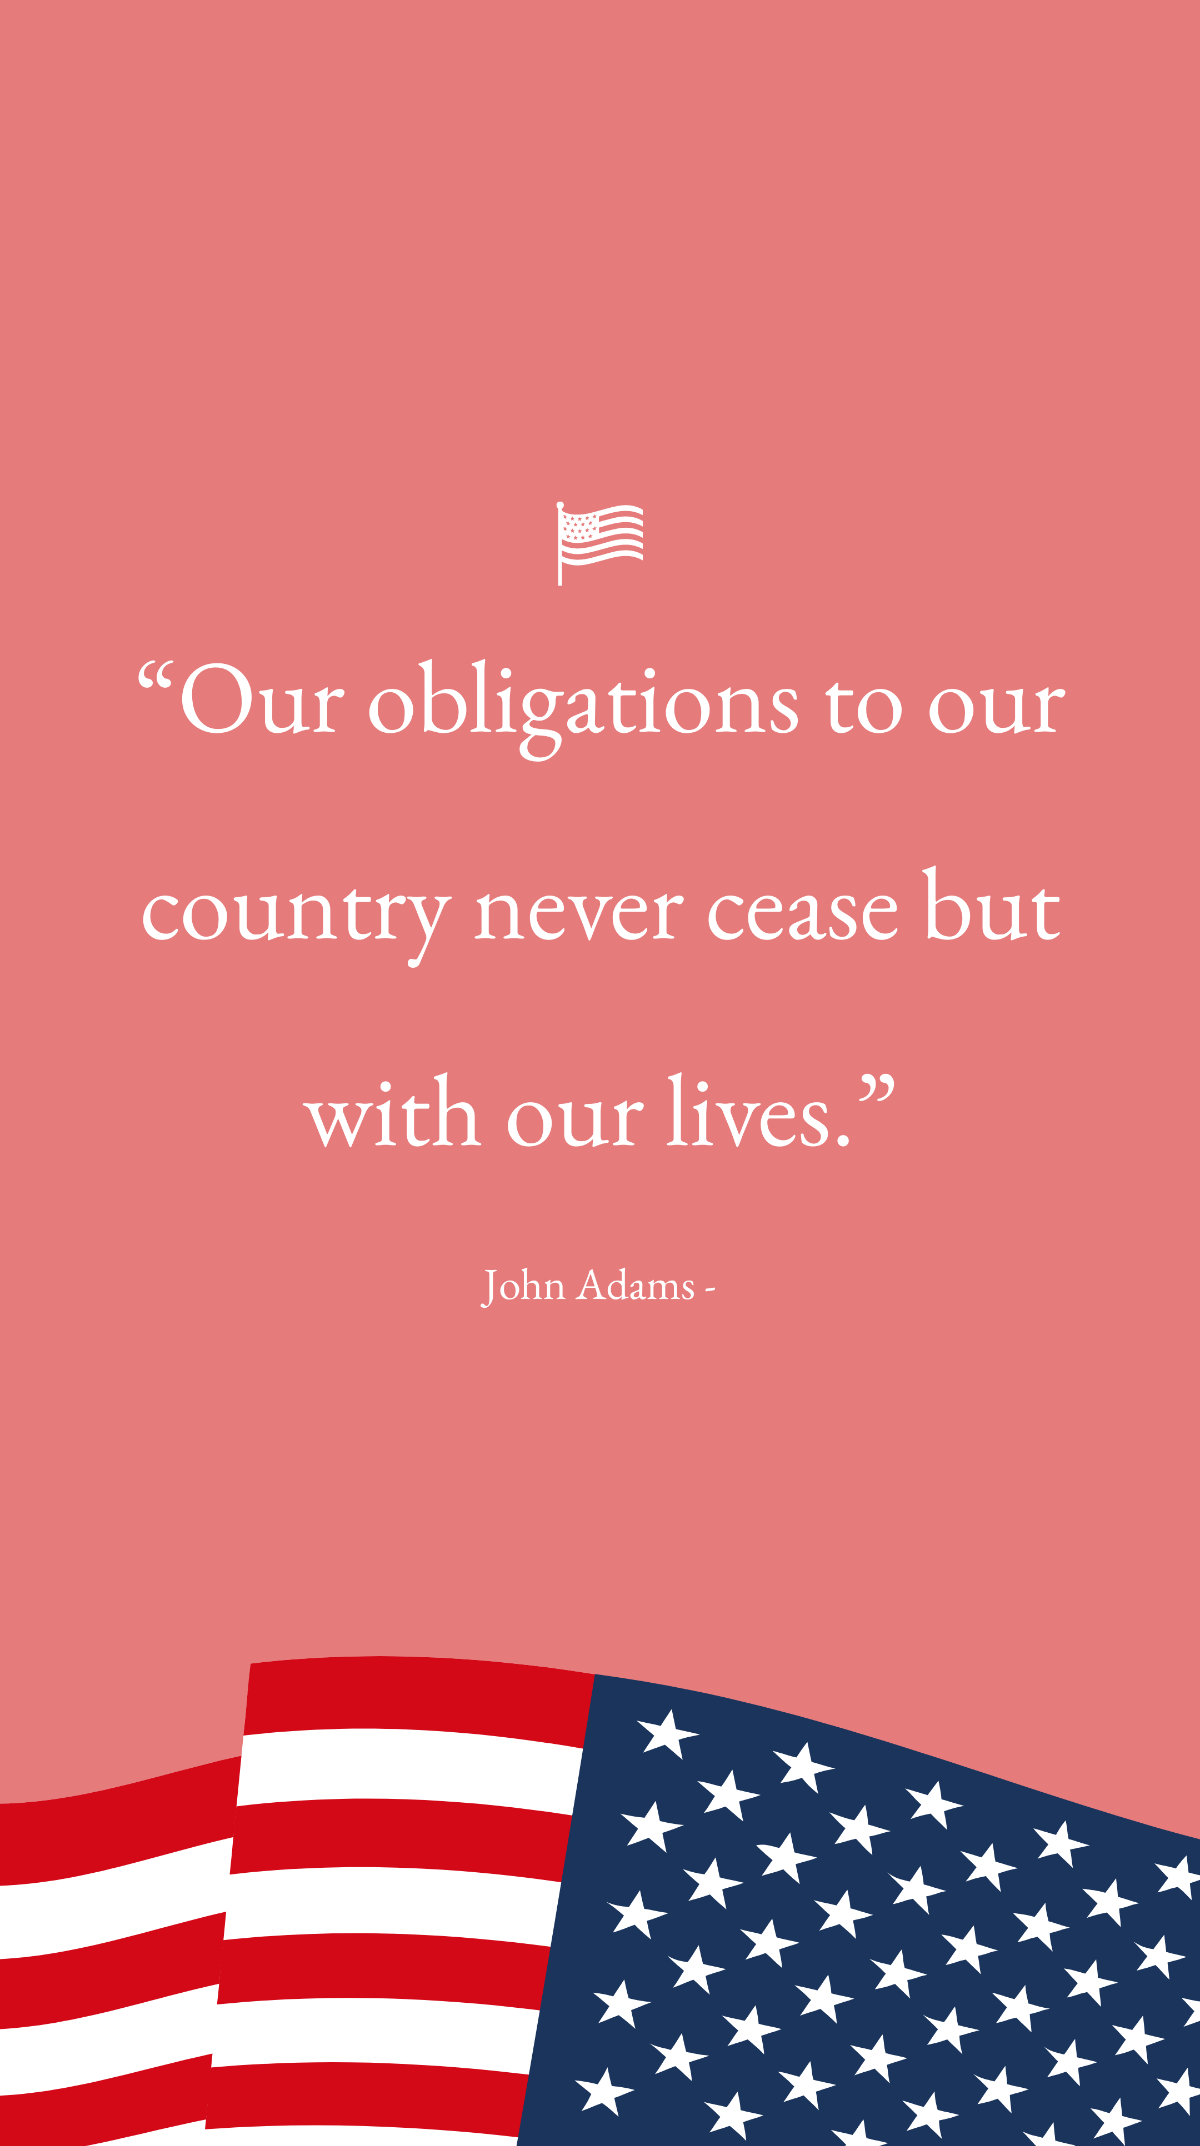 John Adams - “Our obligations to our country never cease but with our lives.” Template